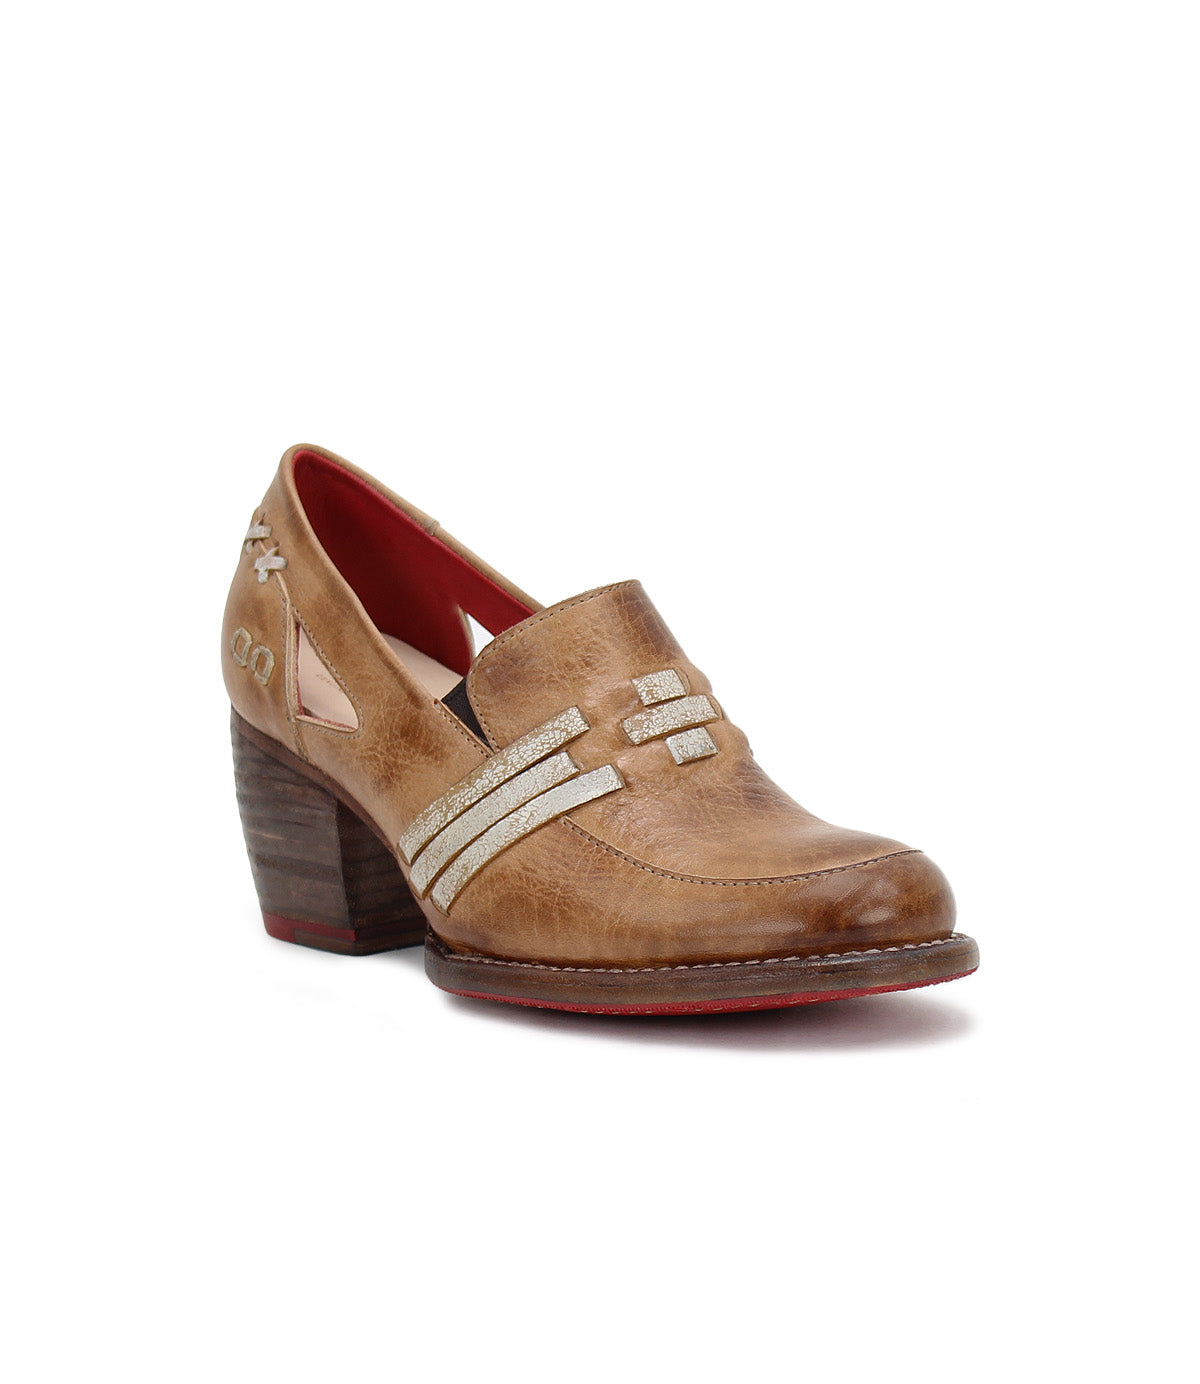 A women's Gabrianna tan leather loafer with a white stripe from Bed Stu.